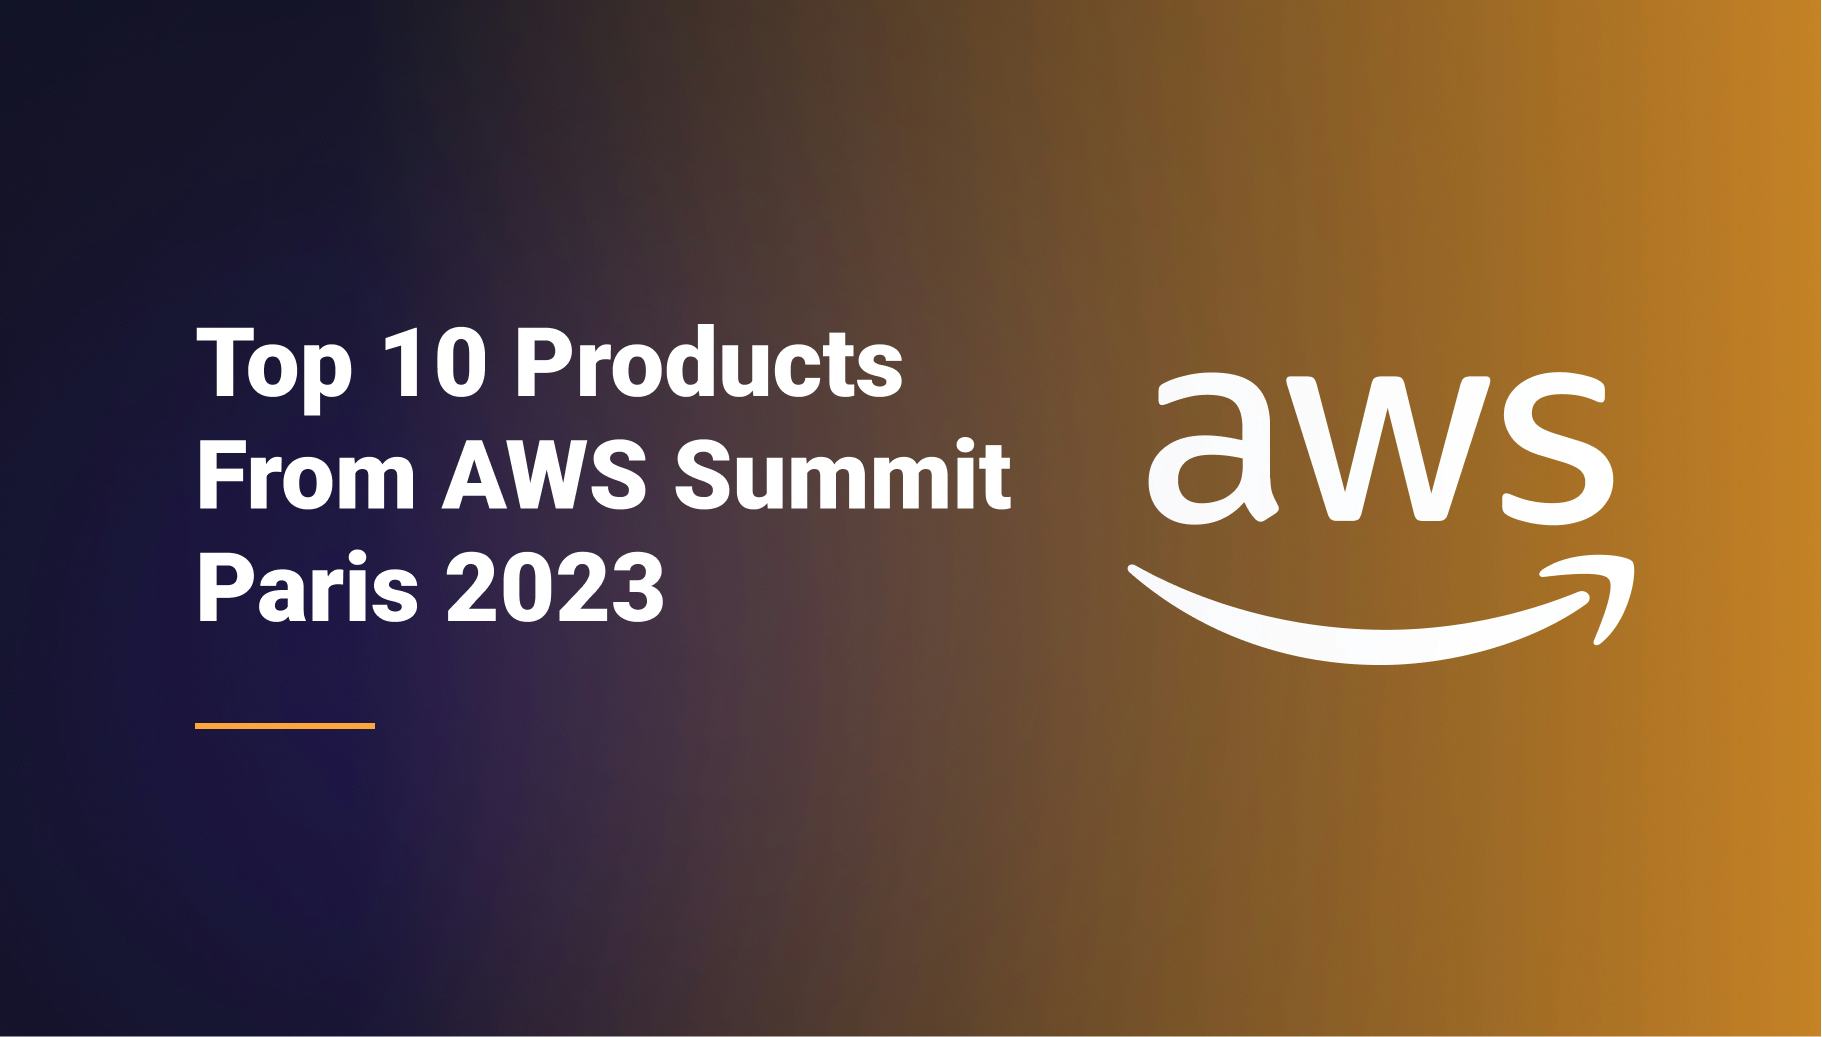 The Top 10 Products From AWS Summit Paris 2023